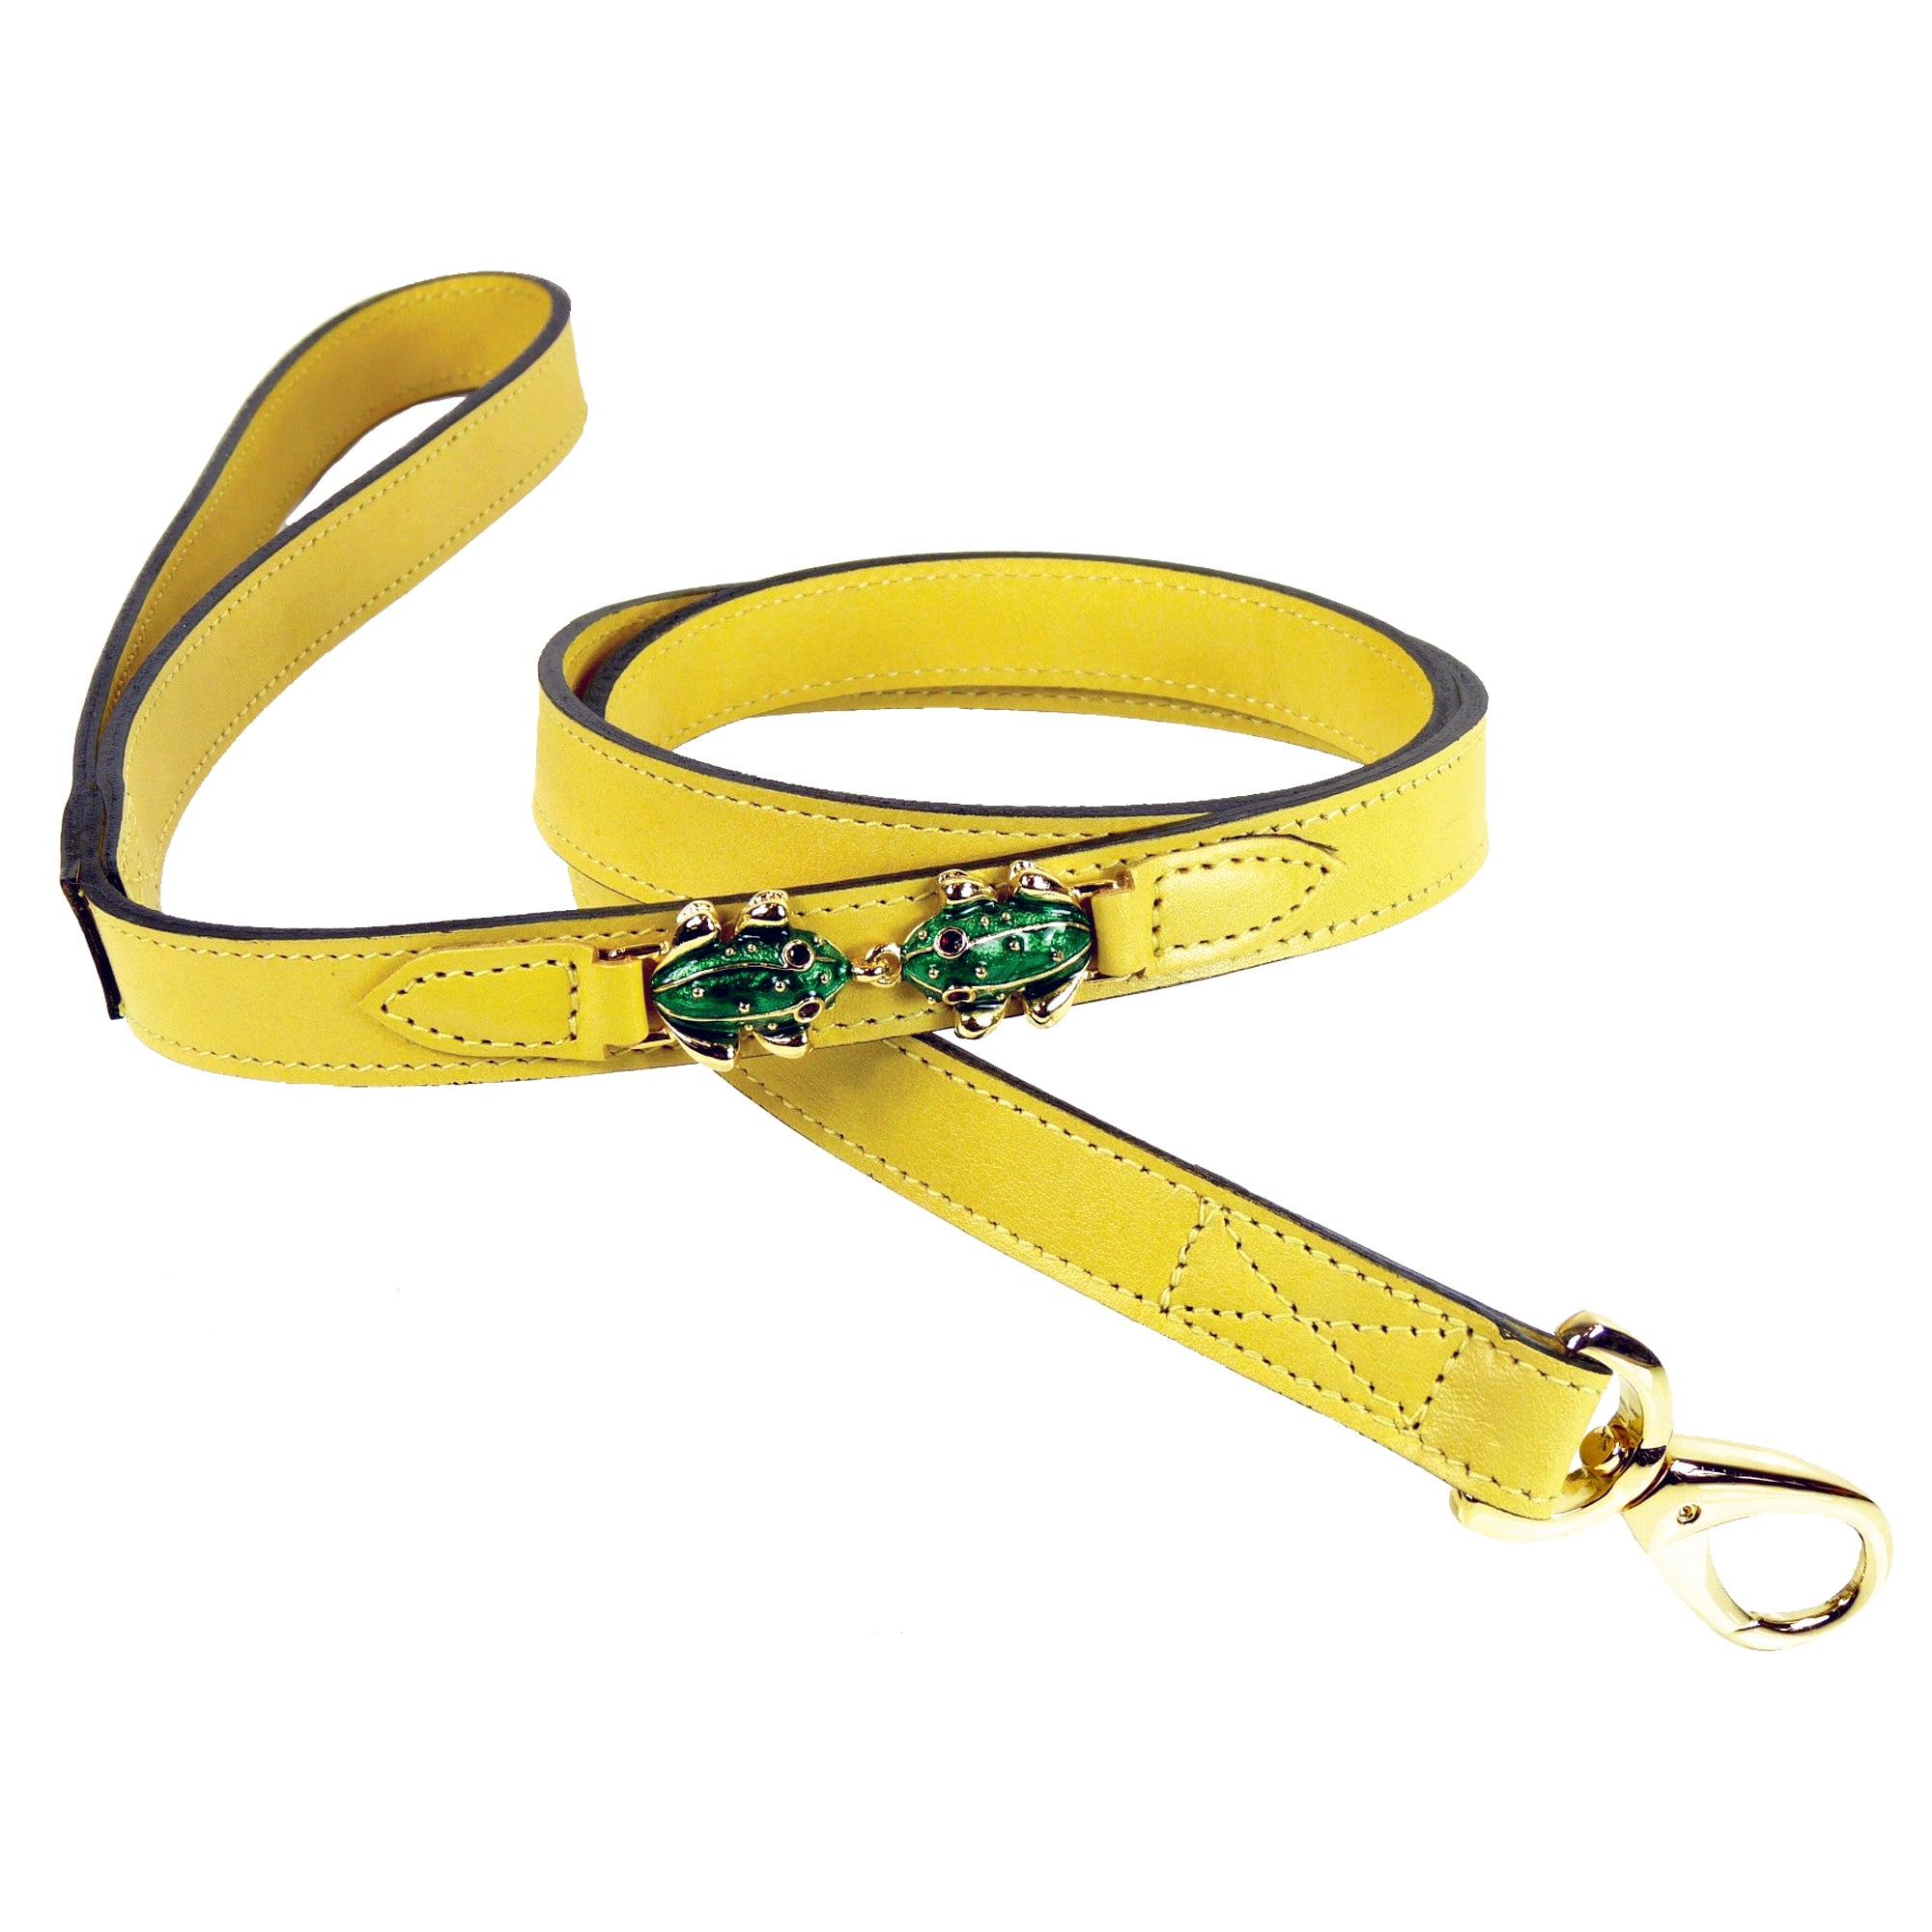 Leap Frog Dog Leash in Canary Yellow & Gold